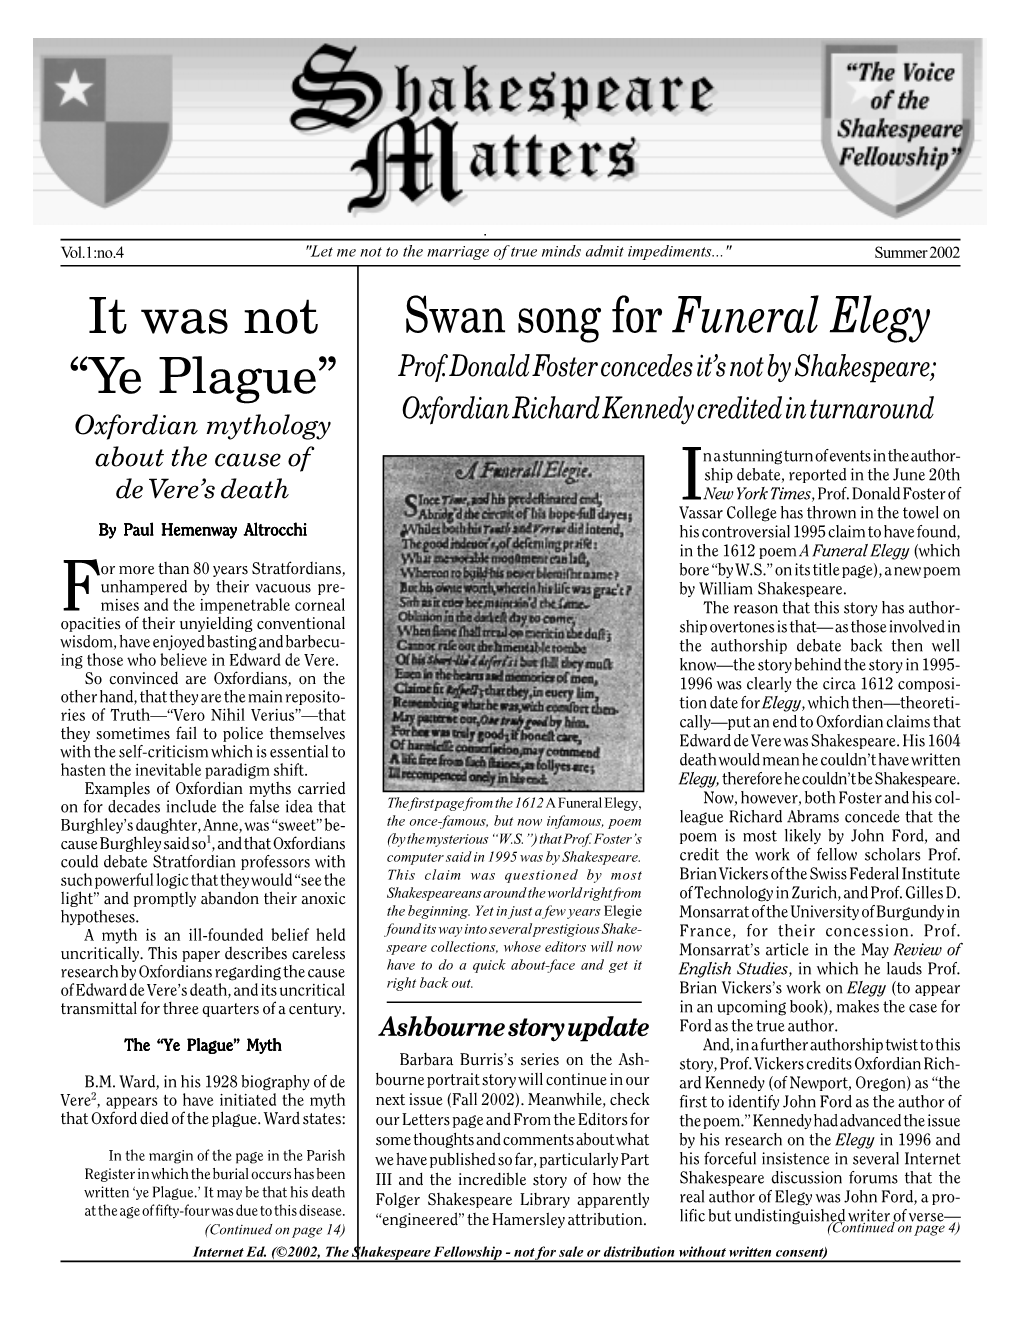 Swan Song for Funeral Elegy It Was Not “Ye Plague”